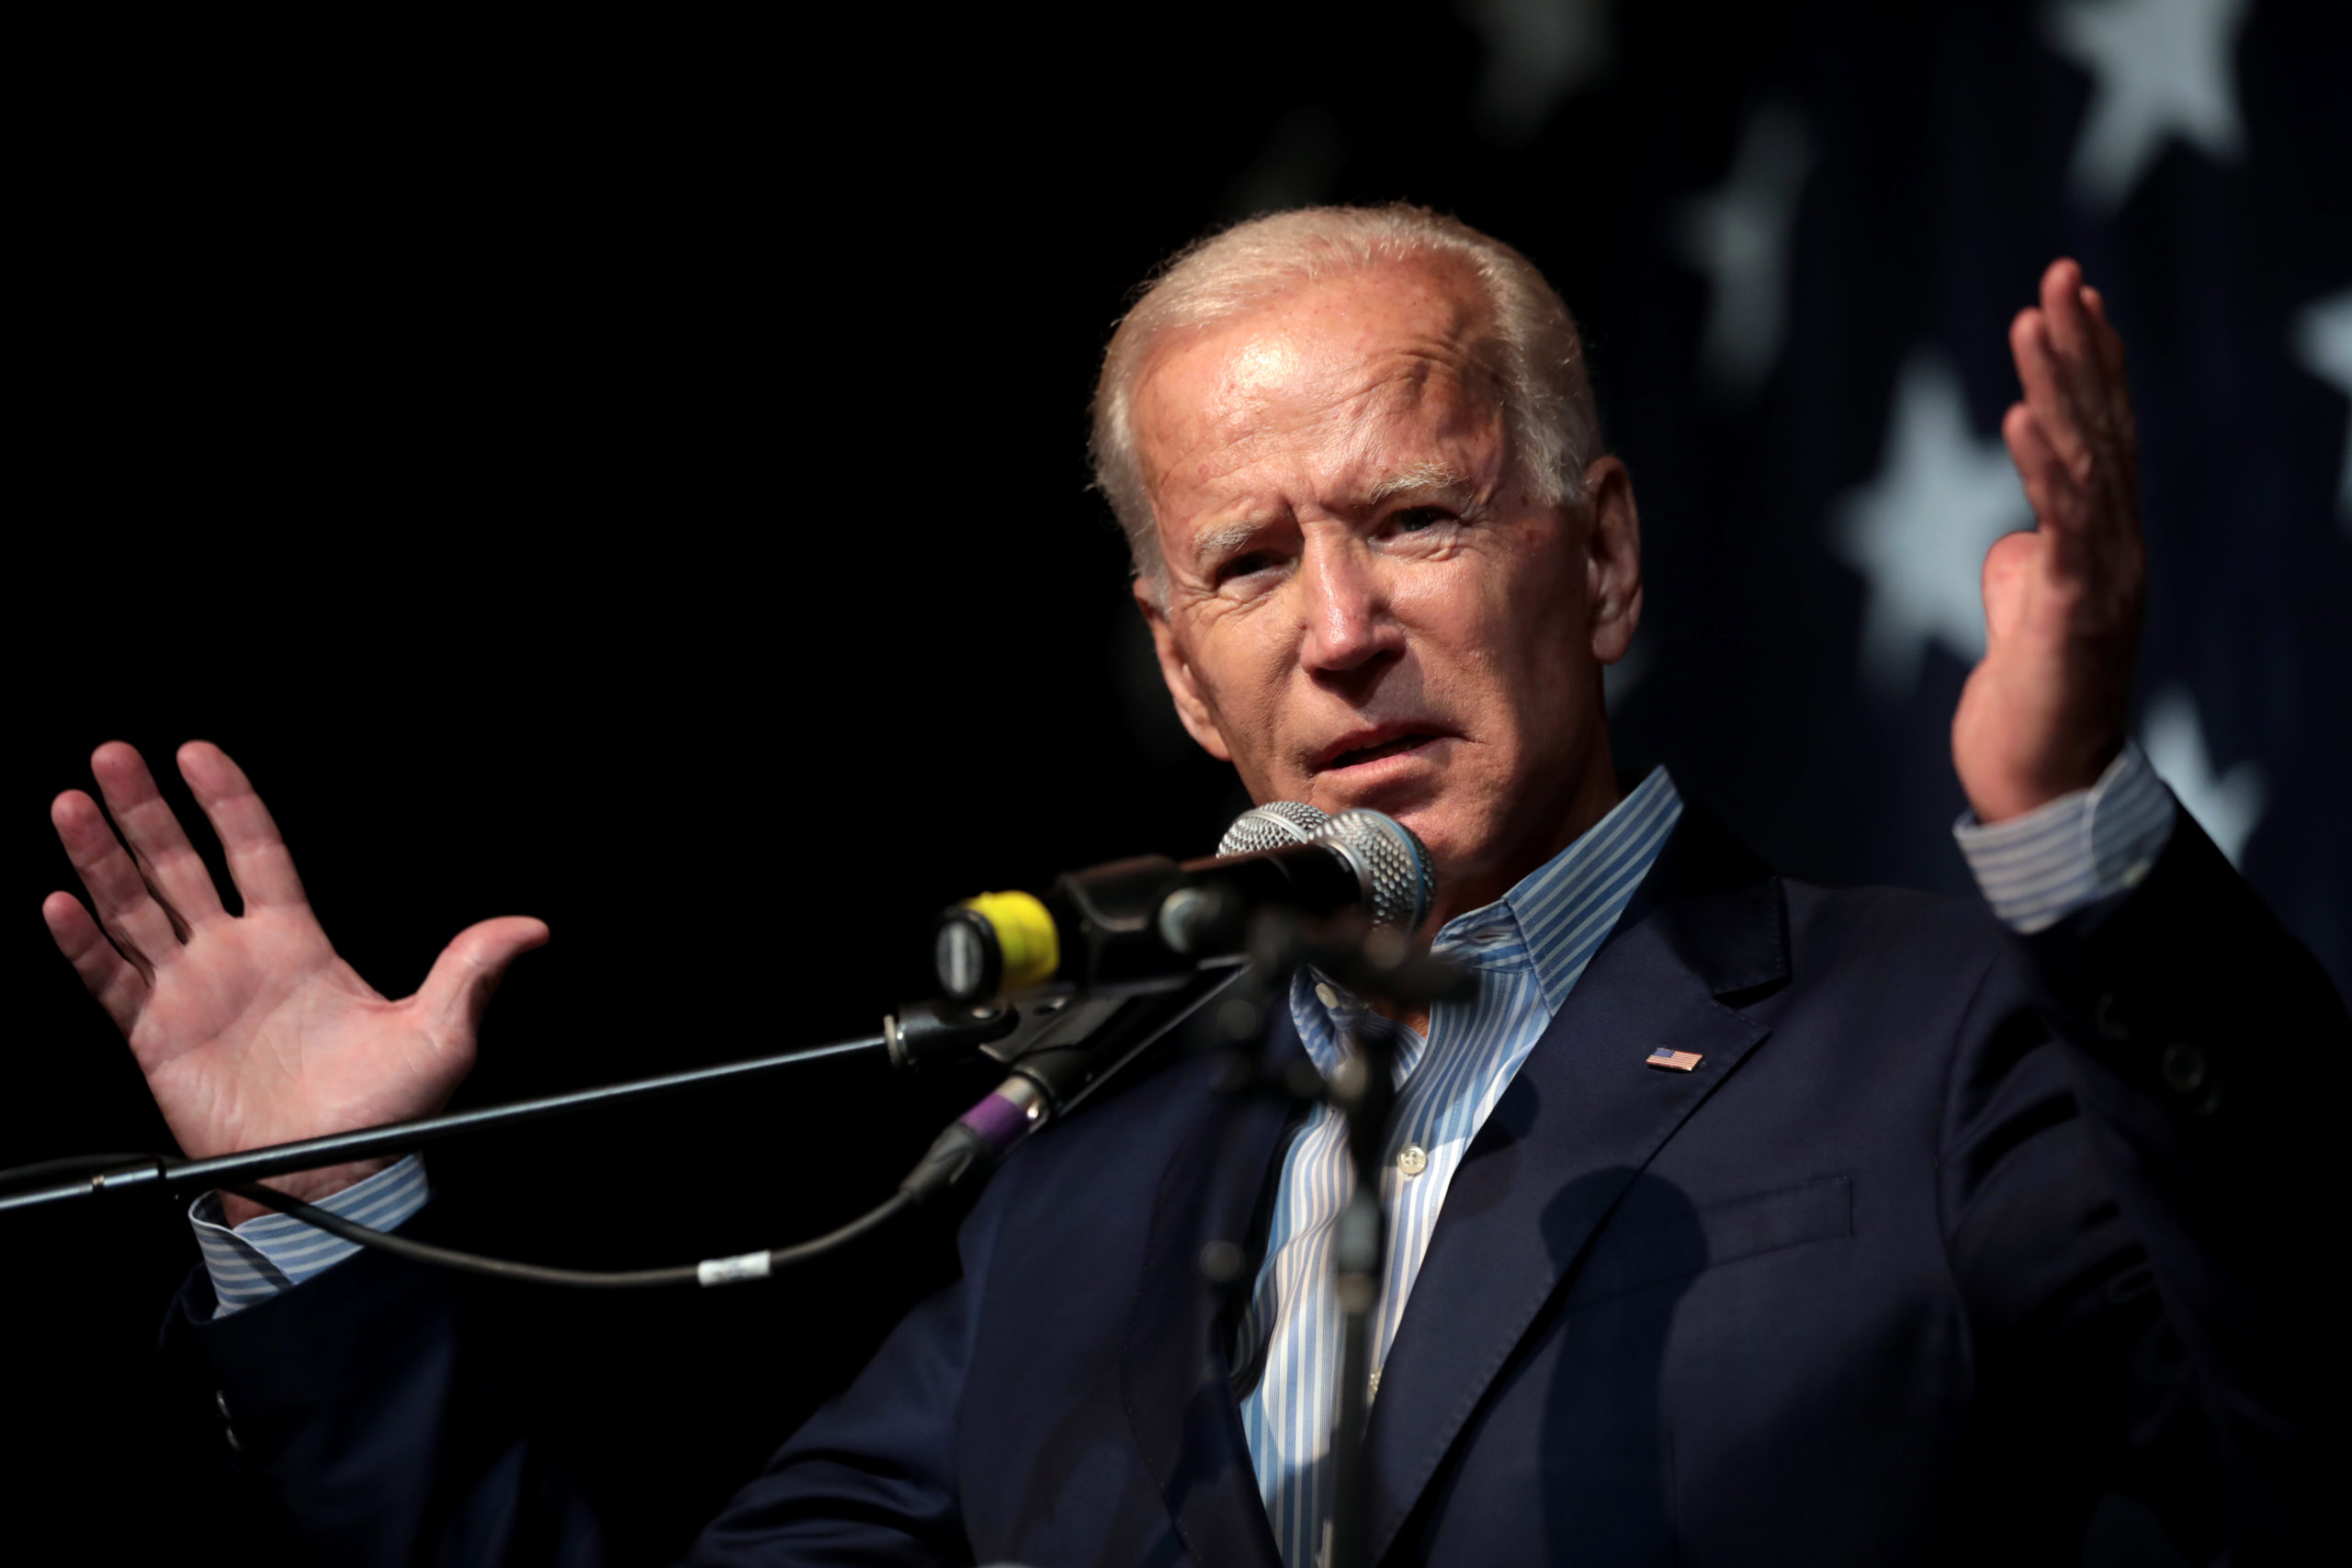 Biden Administration Foreign Policy Priorities and Repair of Global Alliances